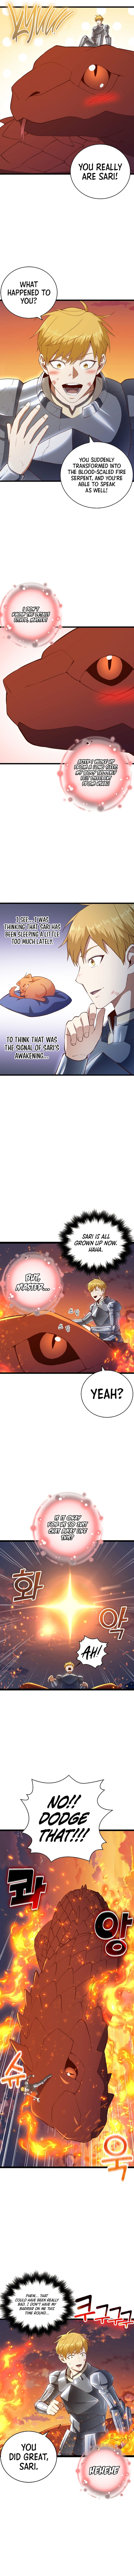 The Lord’s Coins Aren’t Decreasing?! - Chapter 88 Page 4